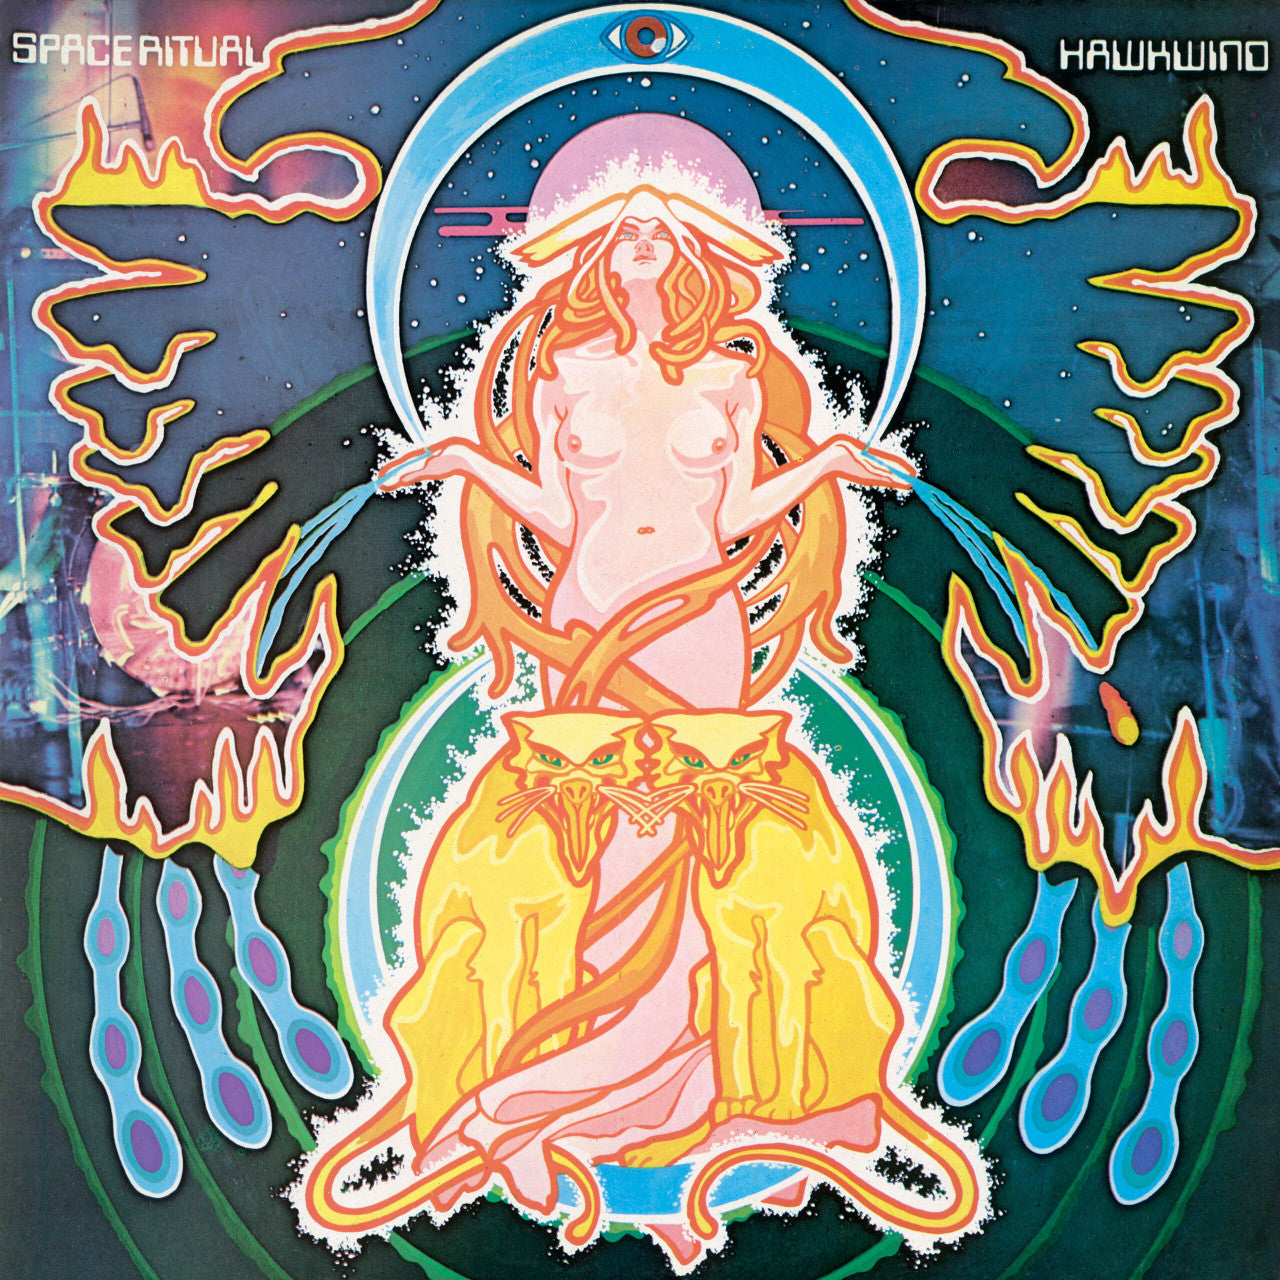 Hawkwind "Space Ritual" [50th Anniversary Deluxe Clear Vinyl] 2LP